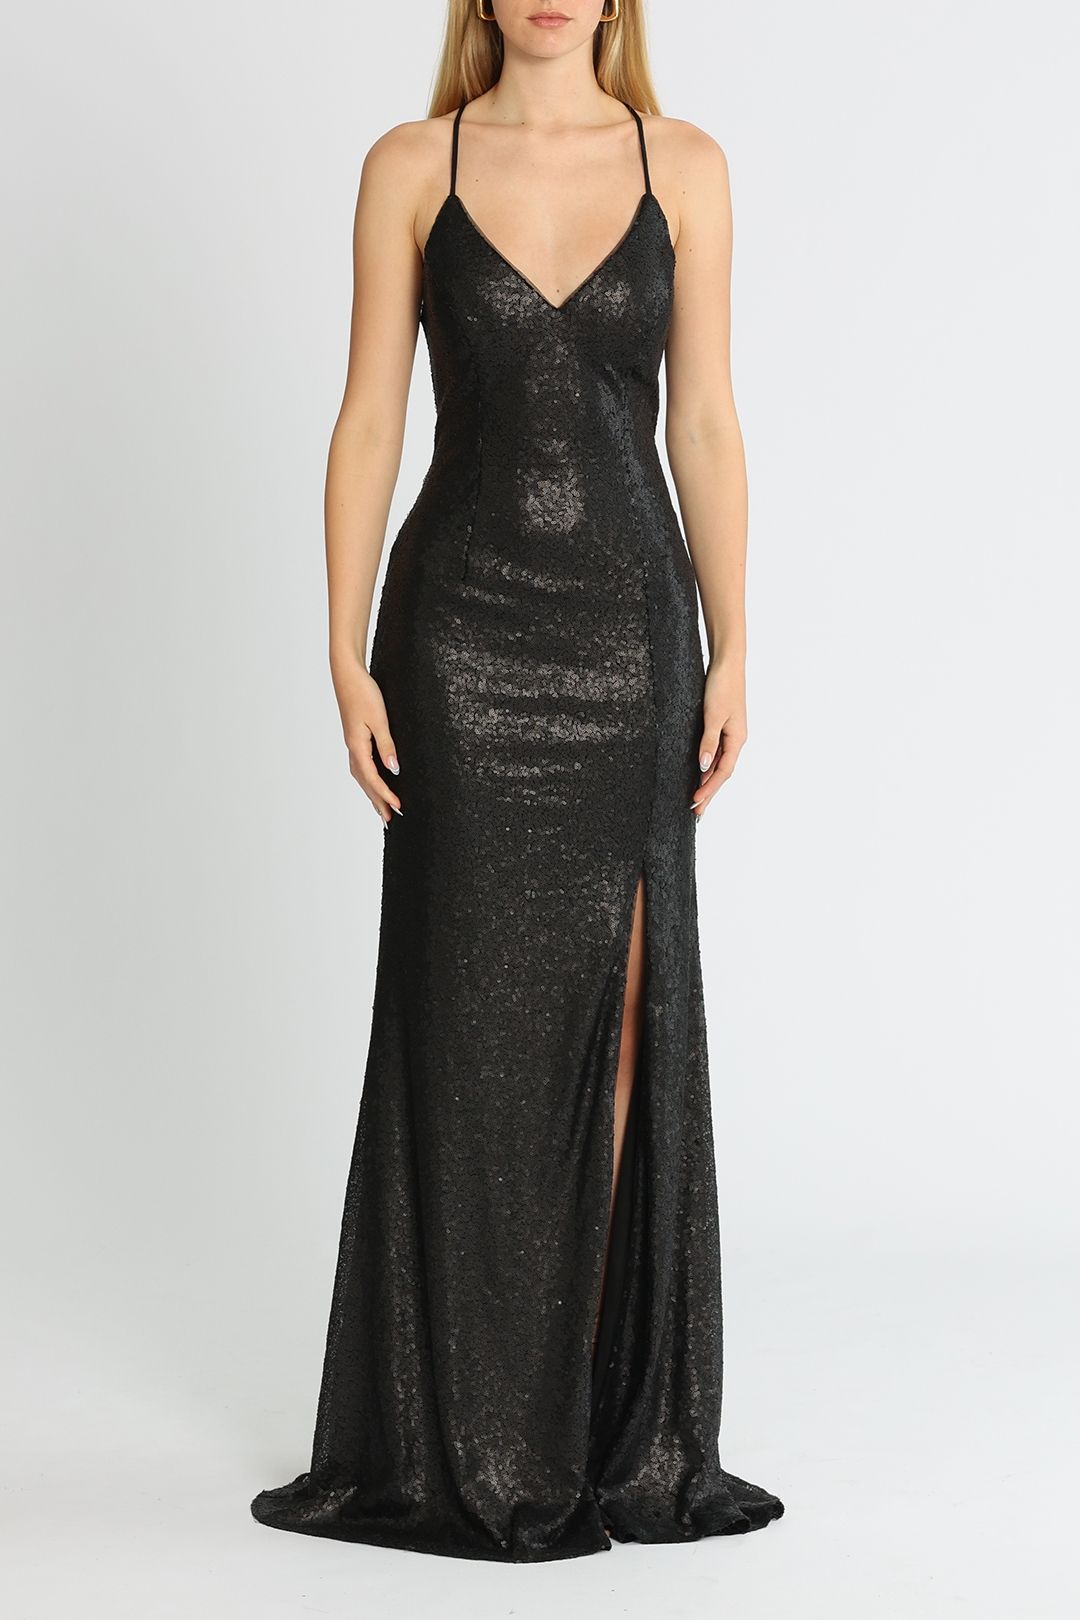 Ae'lkemi - Plunge Backless Gown Black - Print < ONS Boutique